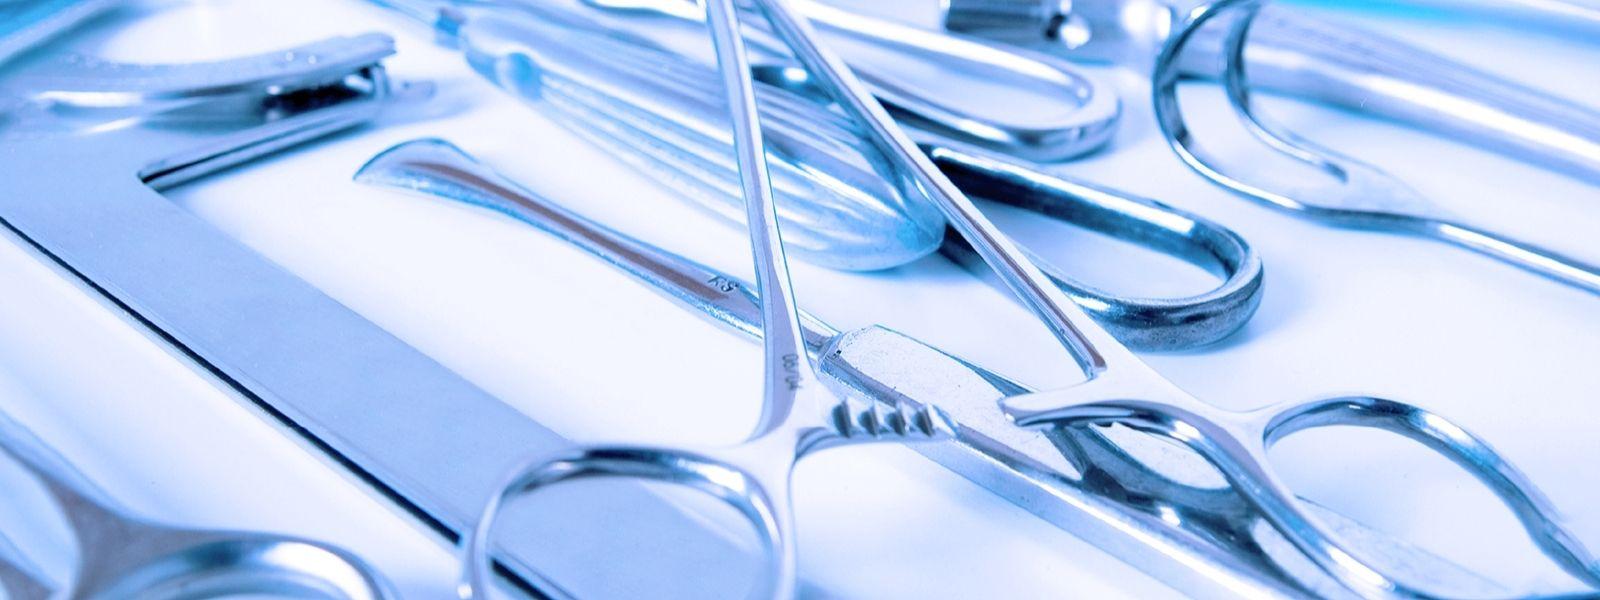 sterile surgical instruments tracking